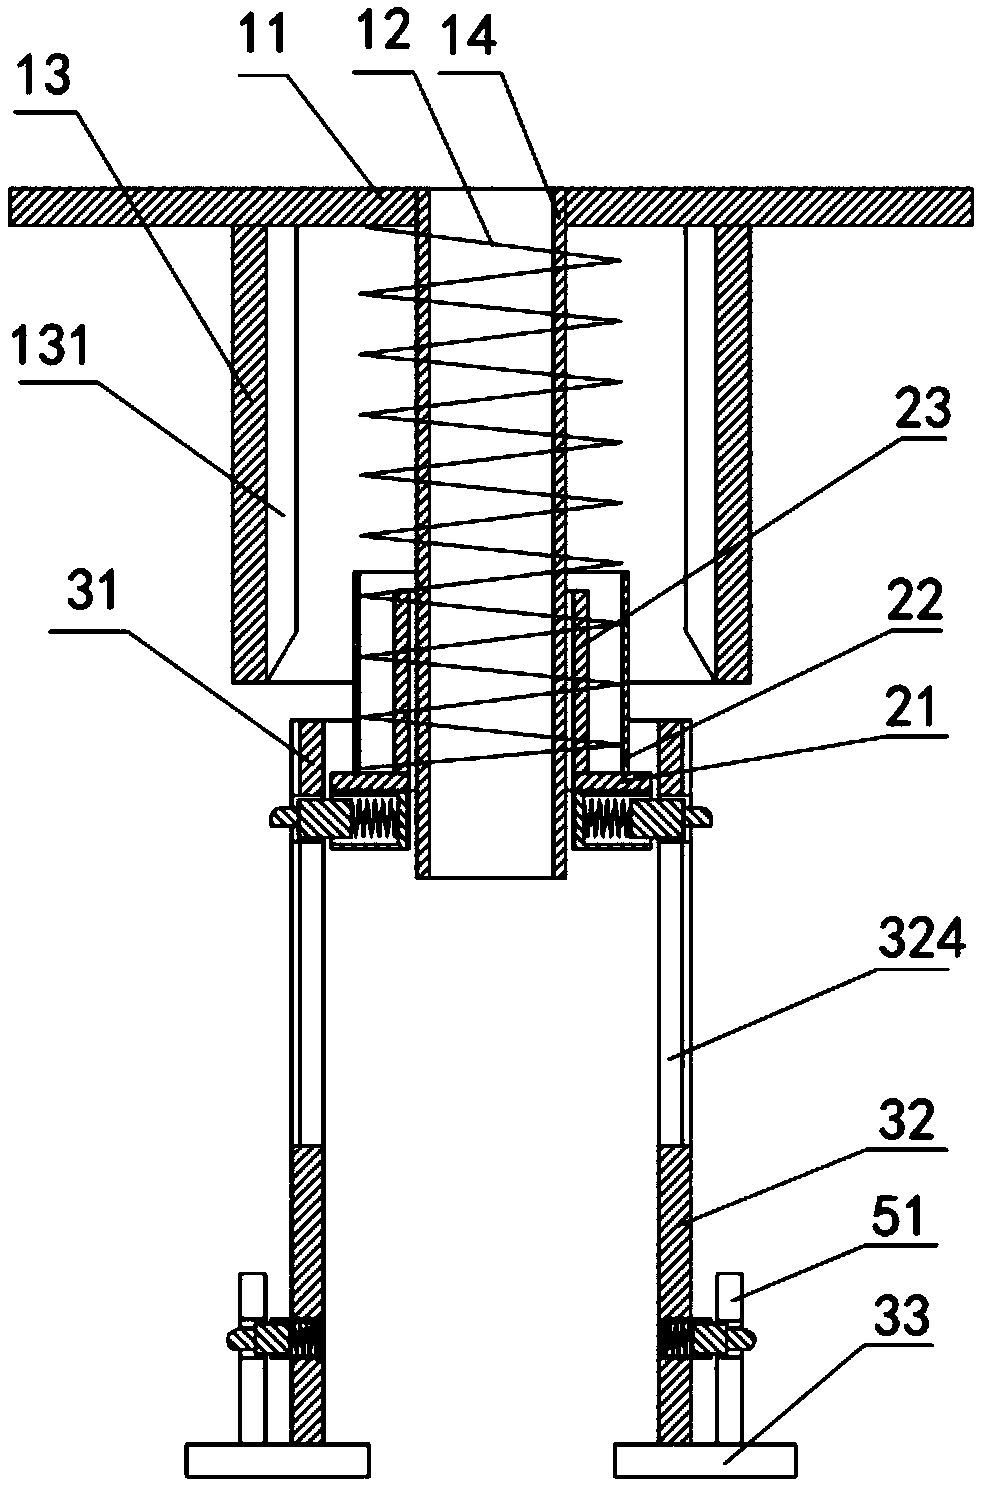 Acupuncture needle inserting assist device